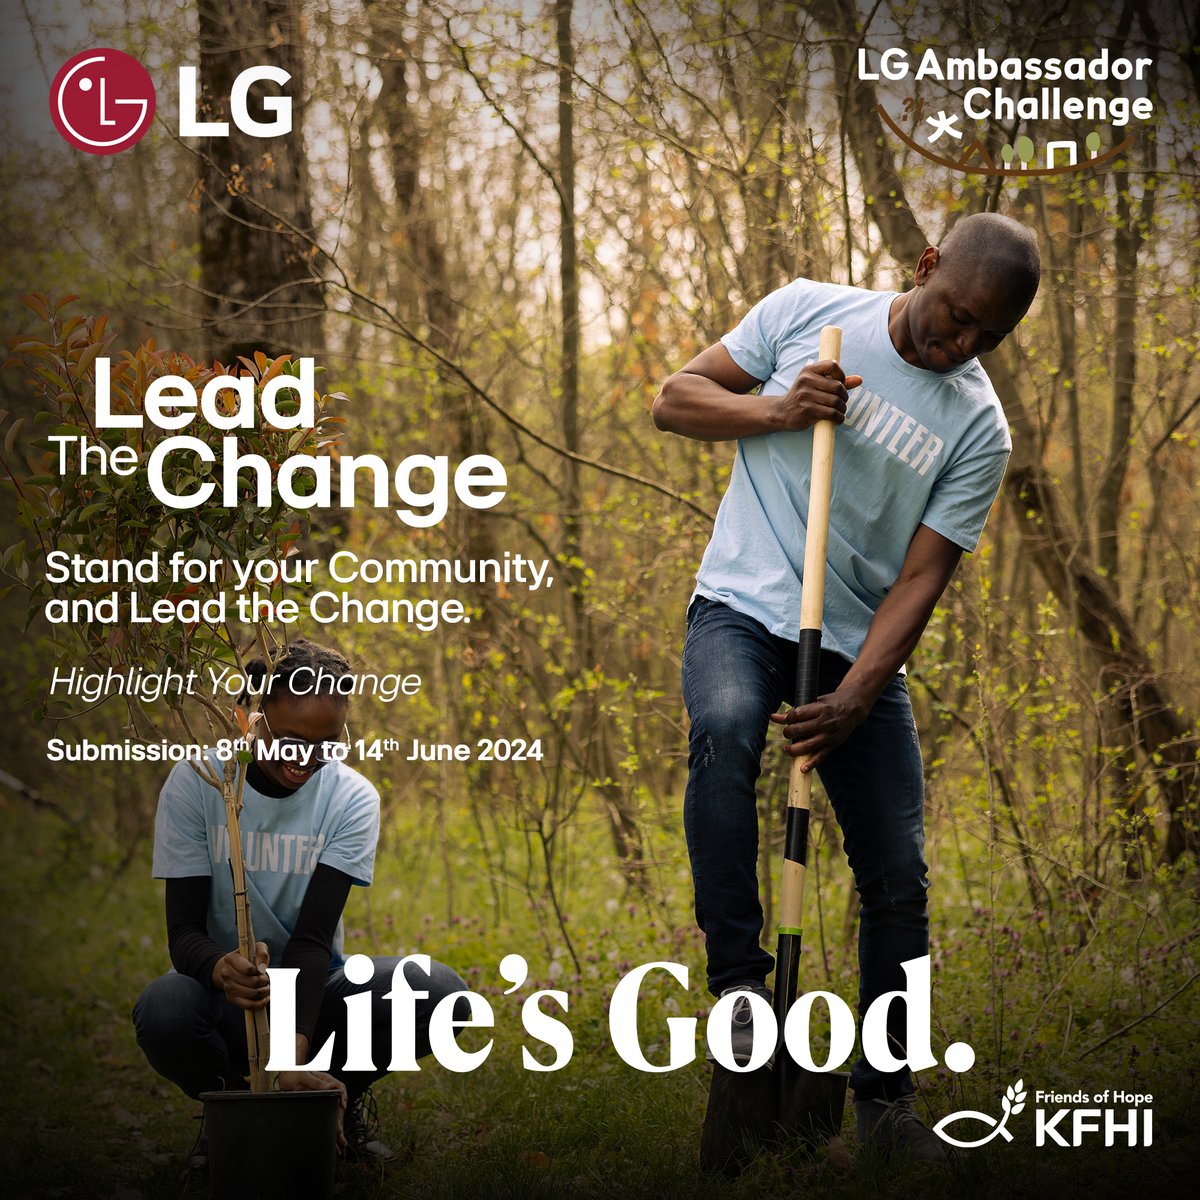 The LG Ambassador Program is more than a competition, it’s an opportunity to create social impact. 
Click here to join the competition: lgambassador.co.ke
#100DaysOfMiracles #LGEastAfrica #LifesGood #LeadTheChange